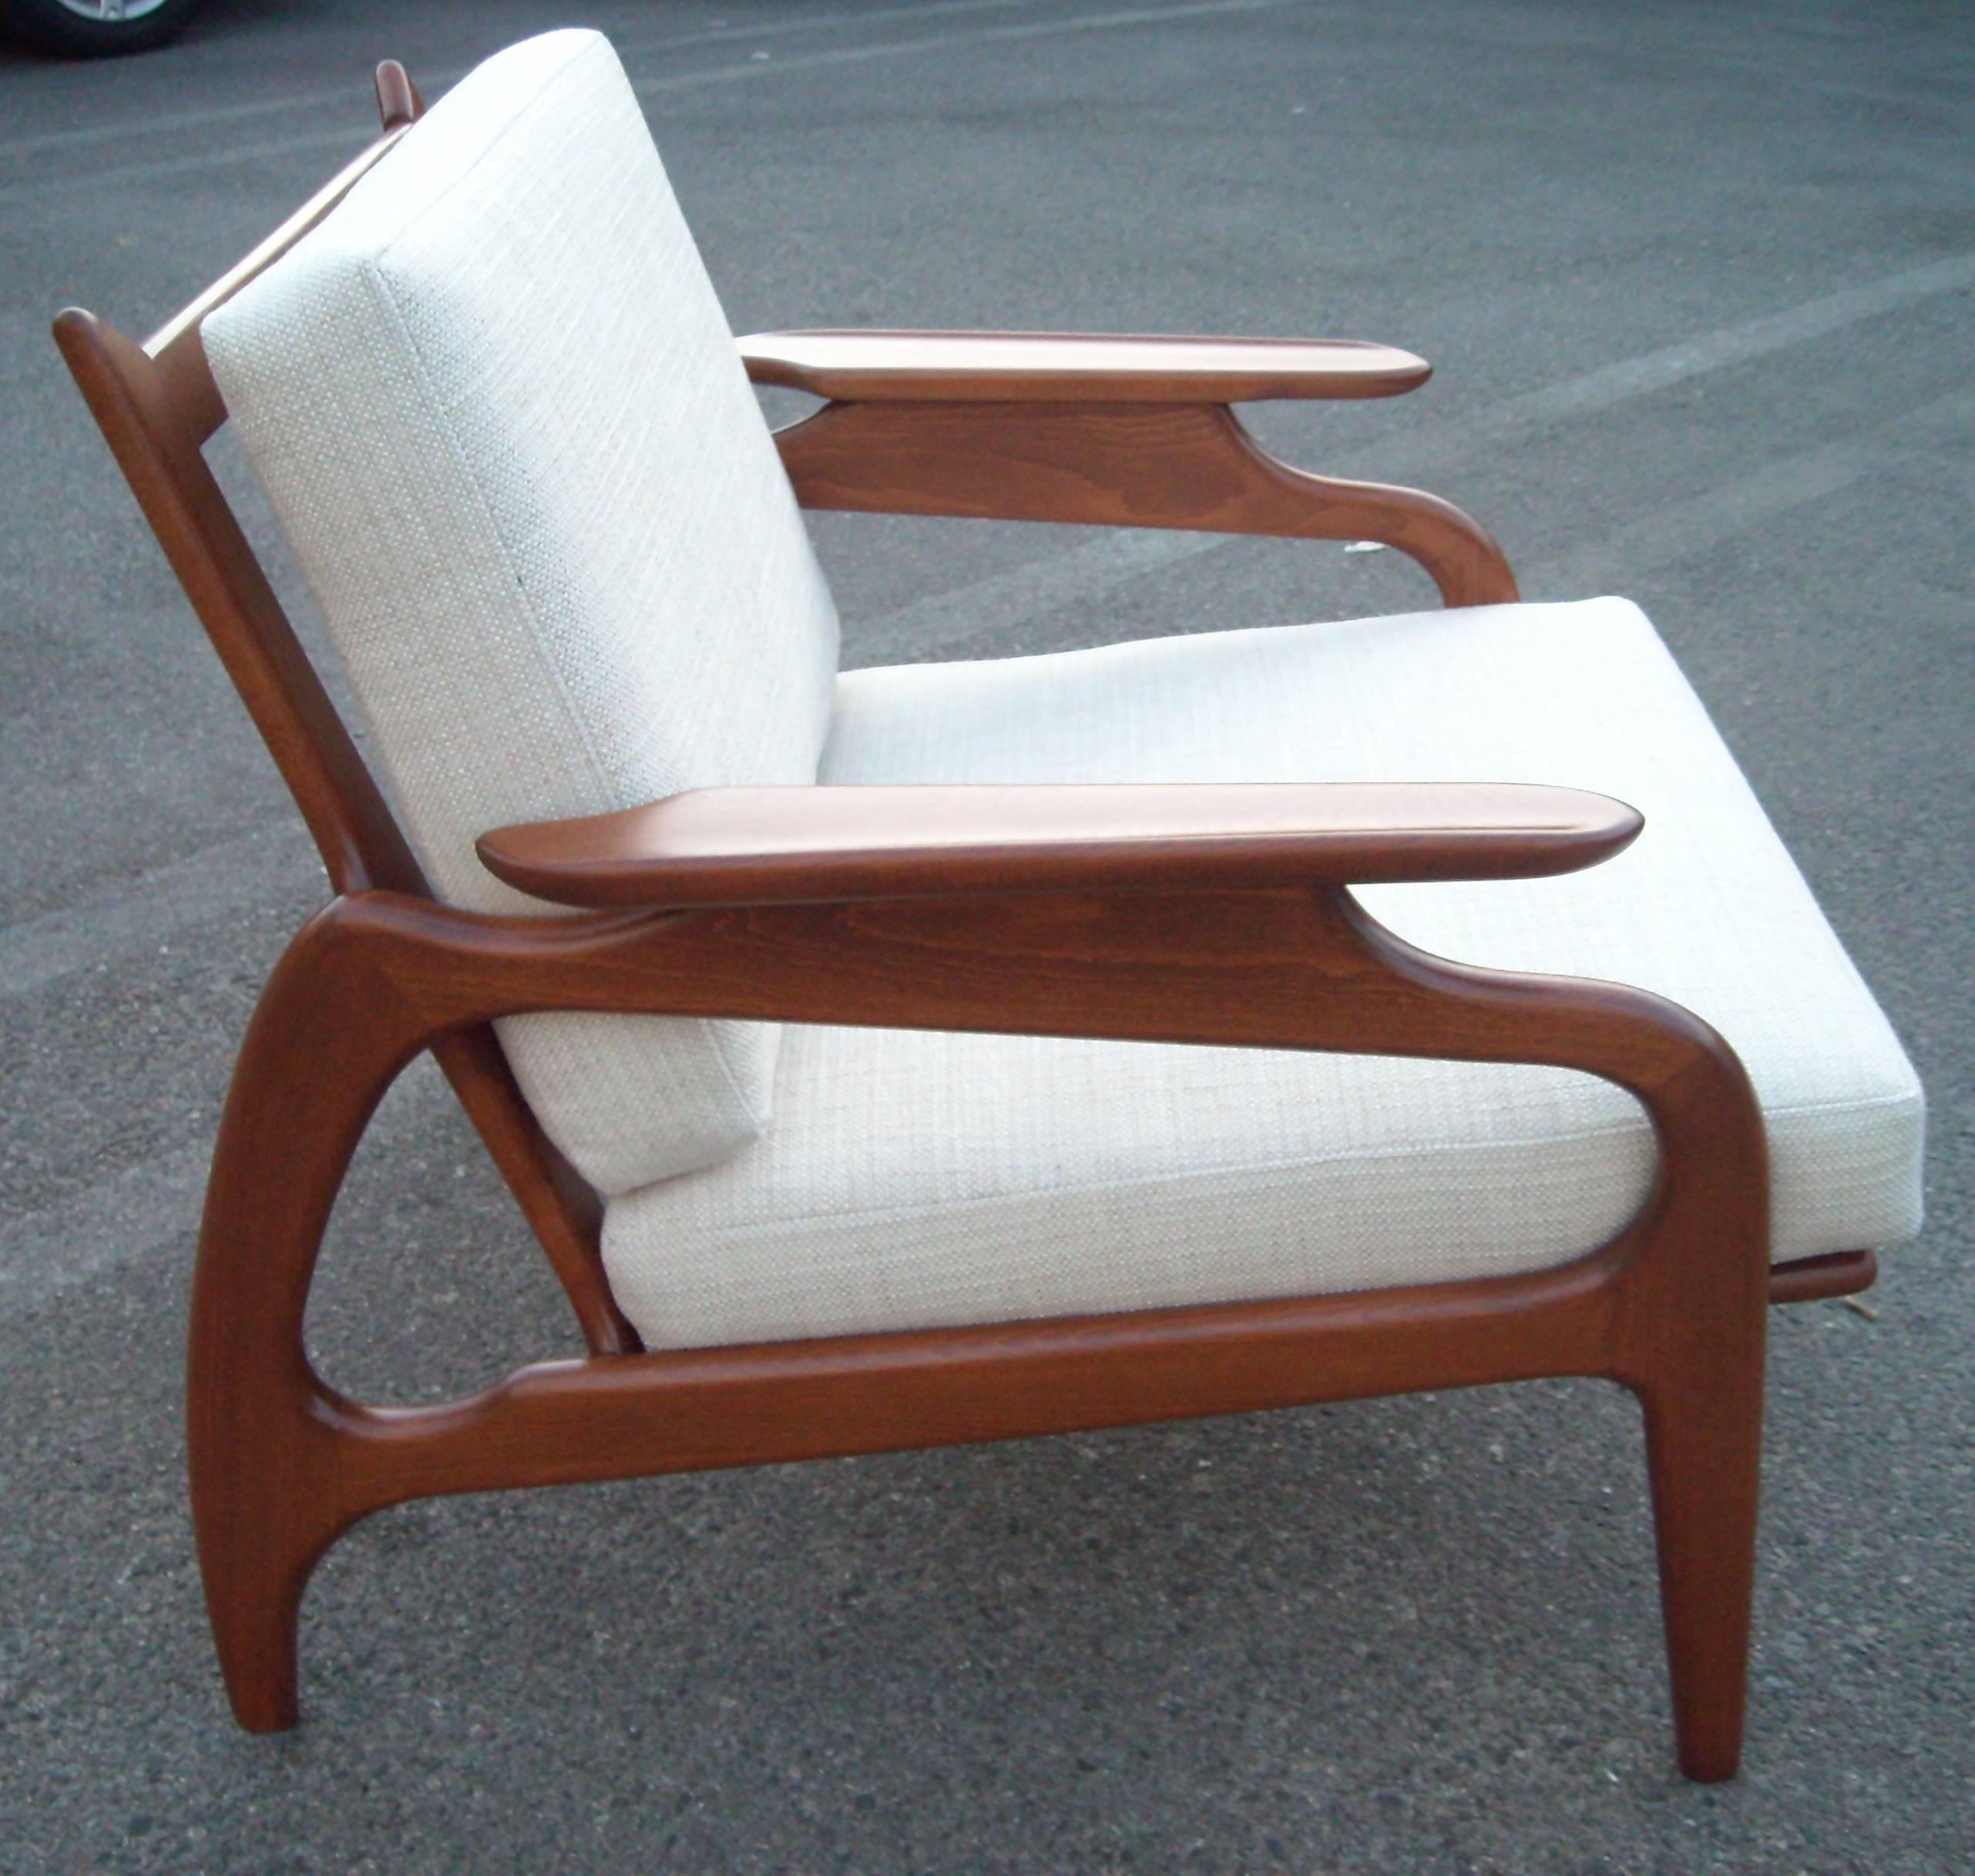 Nice and organic design in this lounge chair, refinished and new fabric cushions.